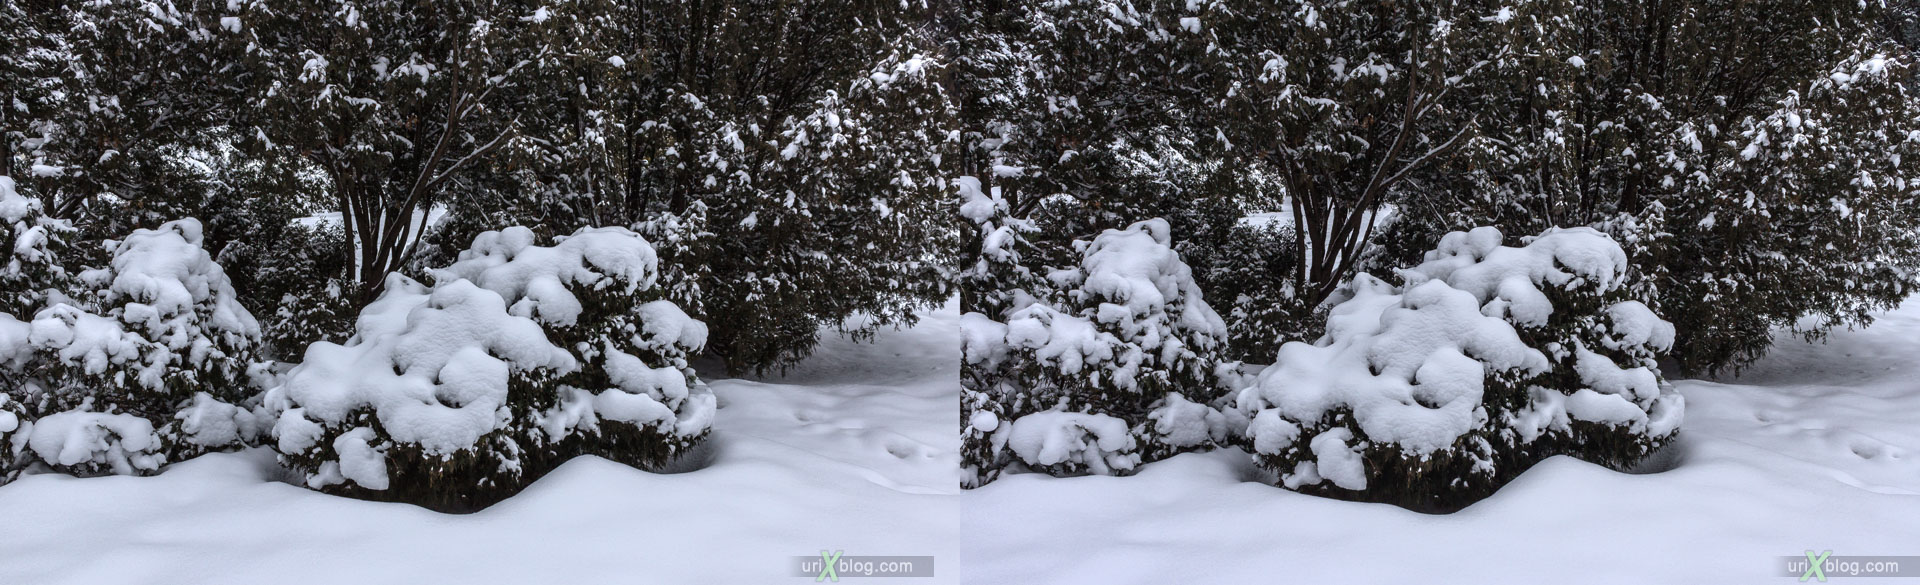 VDNKh, VVTs, park, winter, ice, snow, Moscow, Russia, 3D, stereo pair, cross-eyed, crossview, cross view stereo pair, stereoscopic, 2015